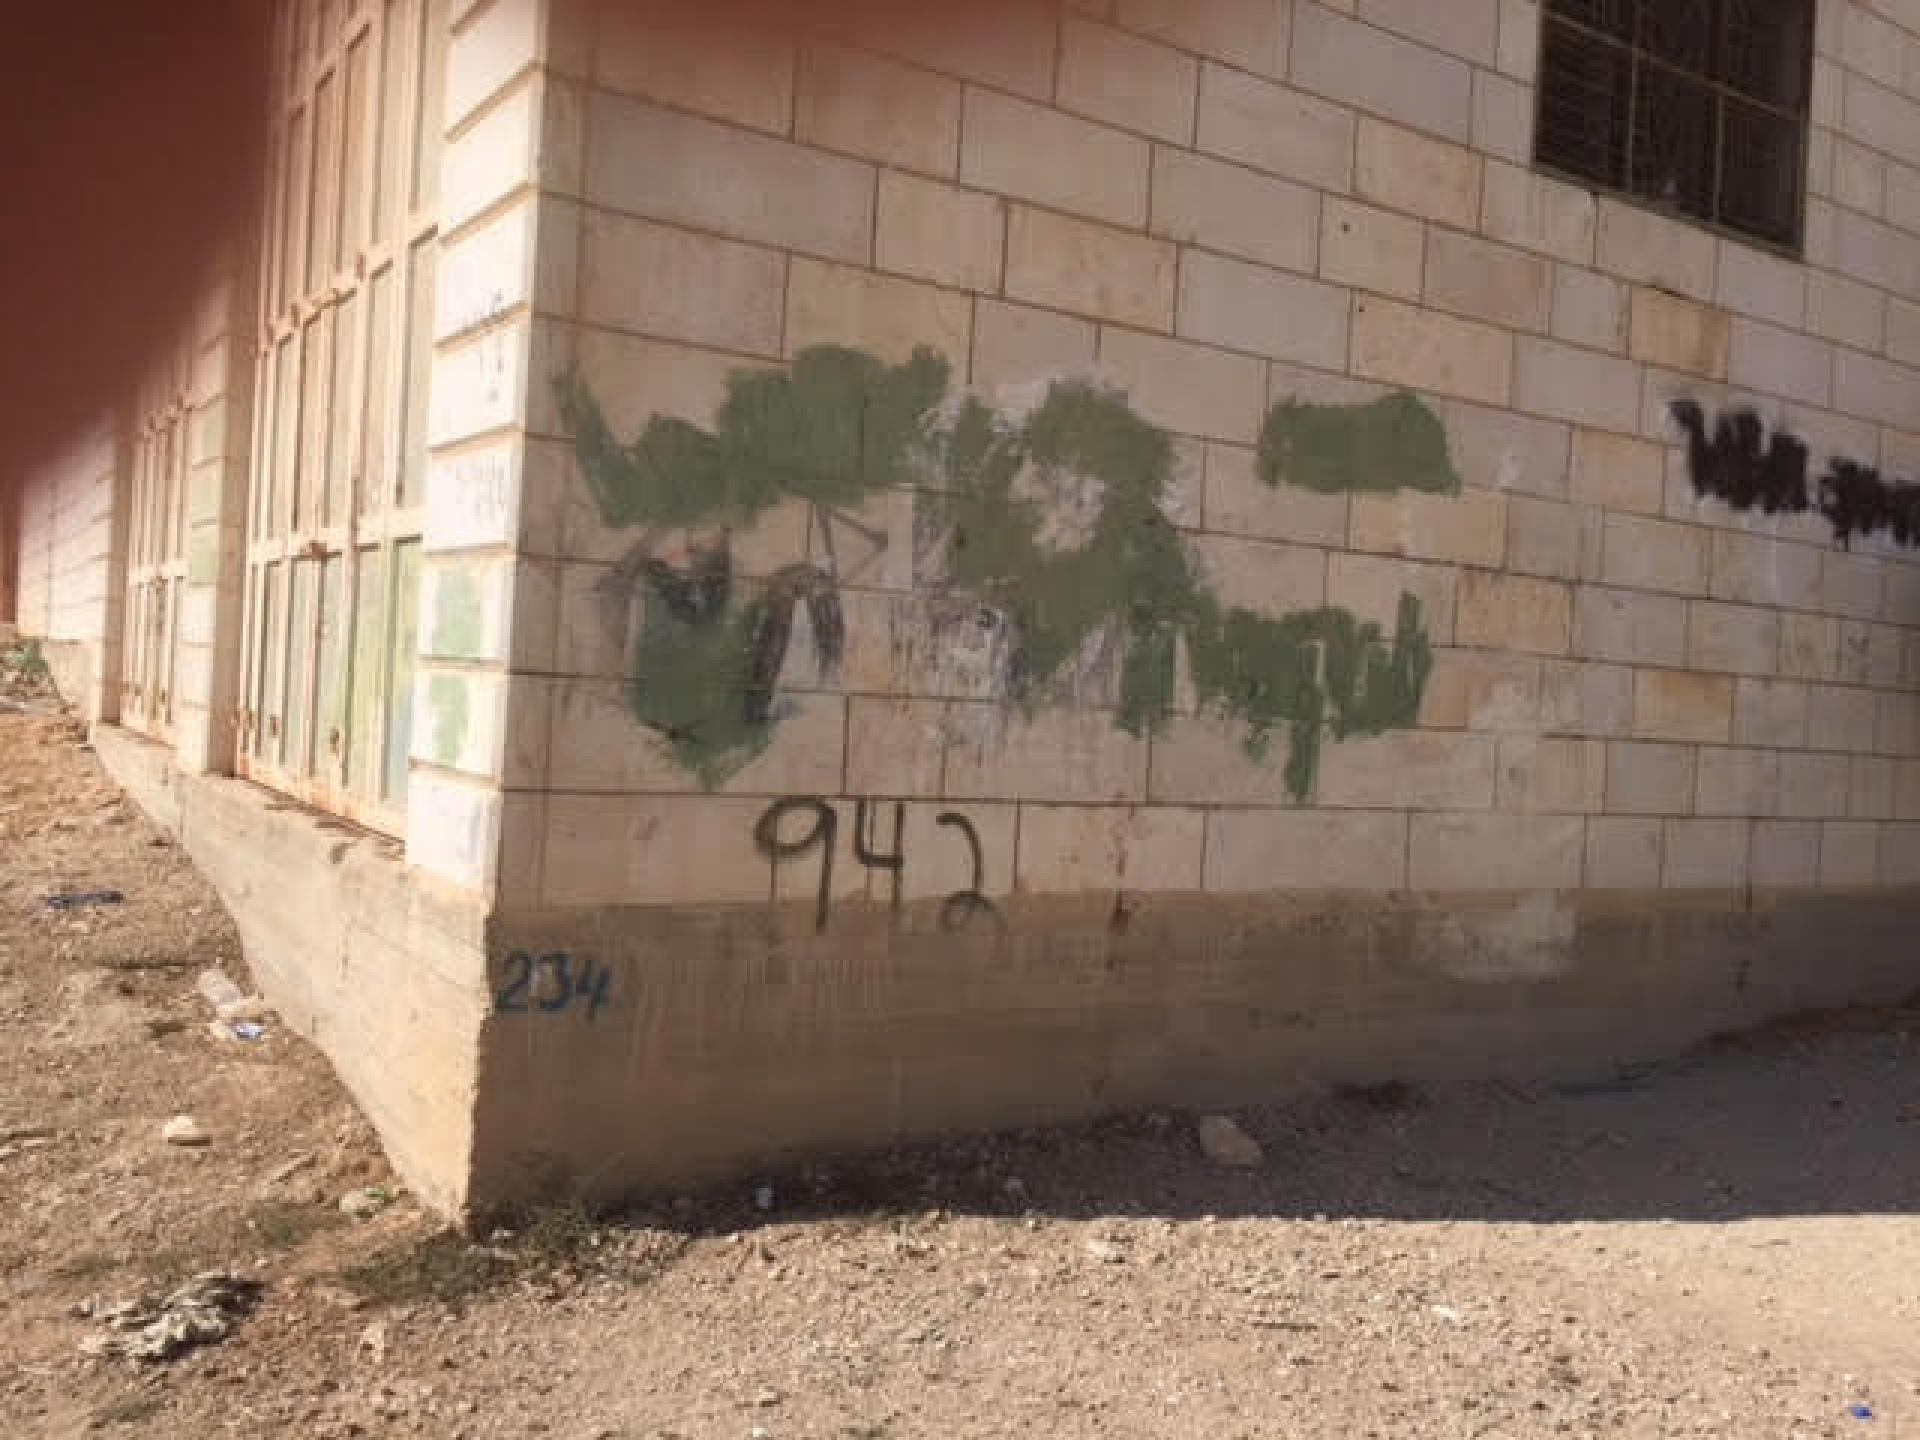 Racist graffiti signs covered with green paint